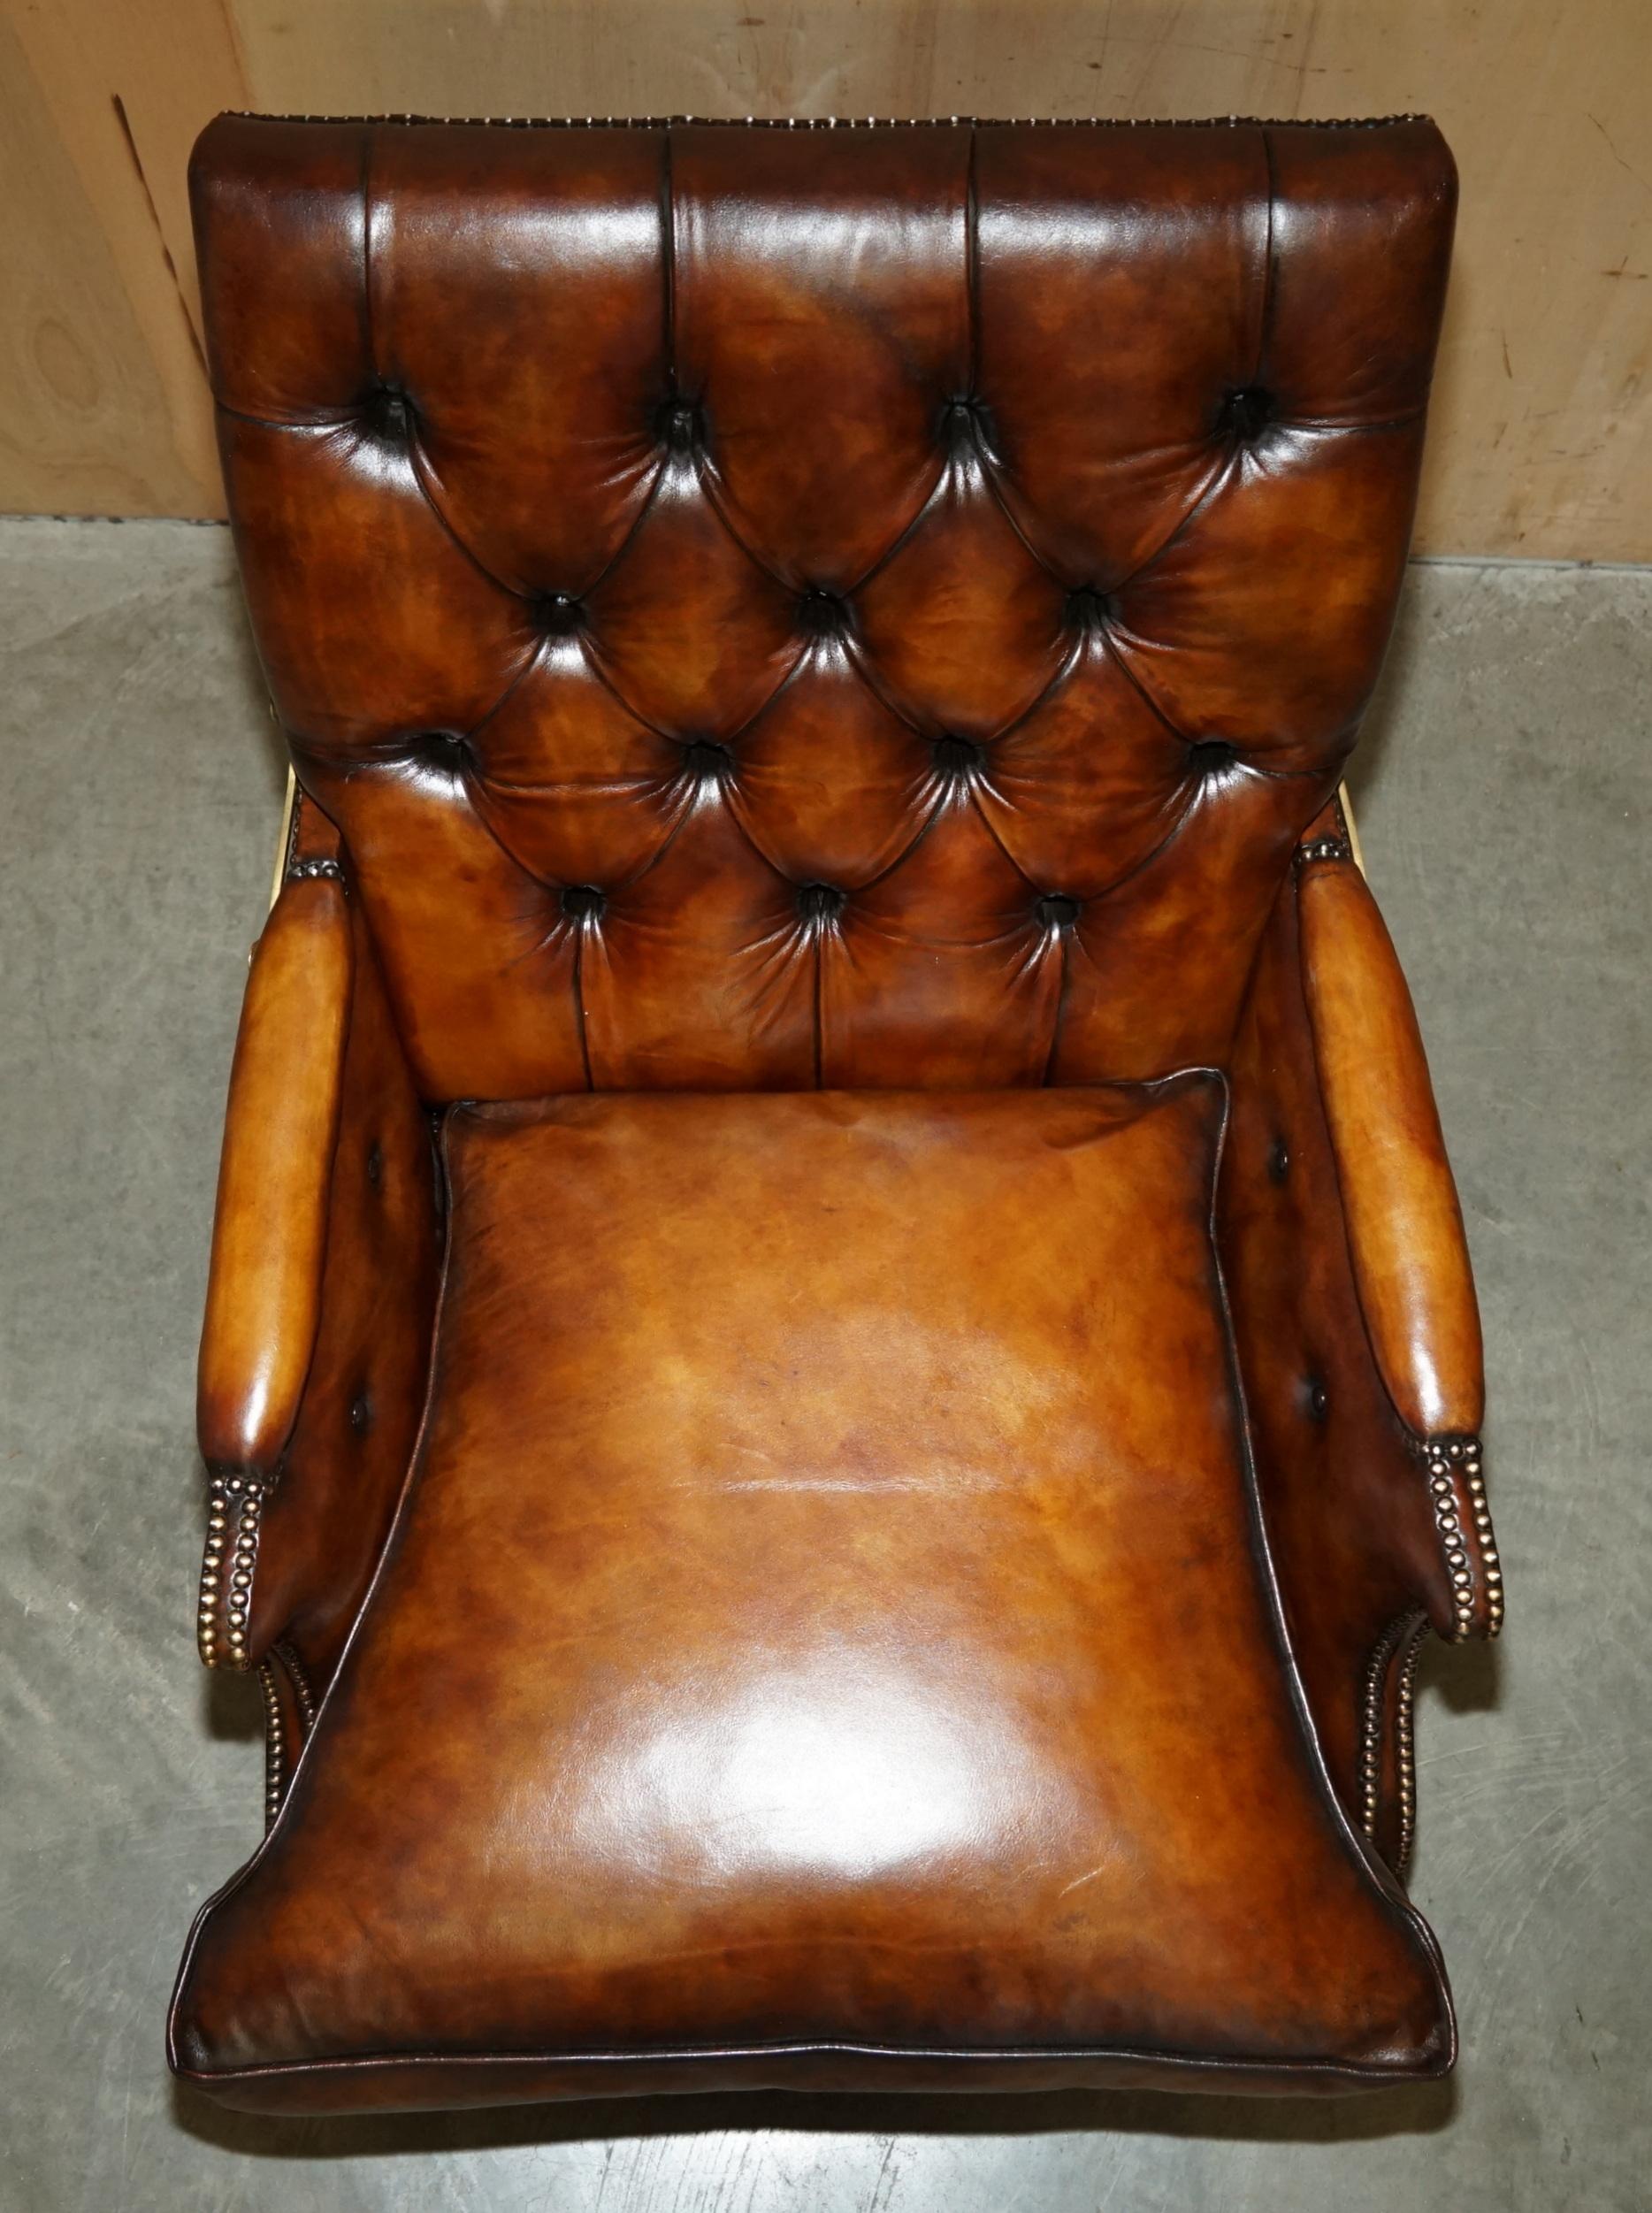 RESTORED CHESTERFIELD TUFTED HAND DYED BROWN LEATHER LIBRARY RECLINER ARMCHAiR (20. Jahrhundert) im Angebot